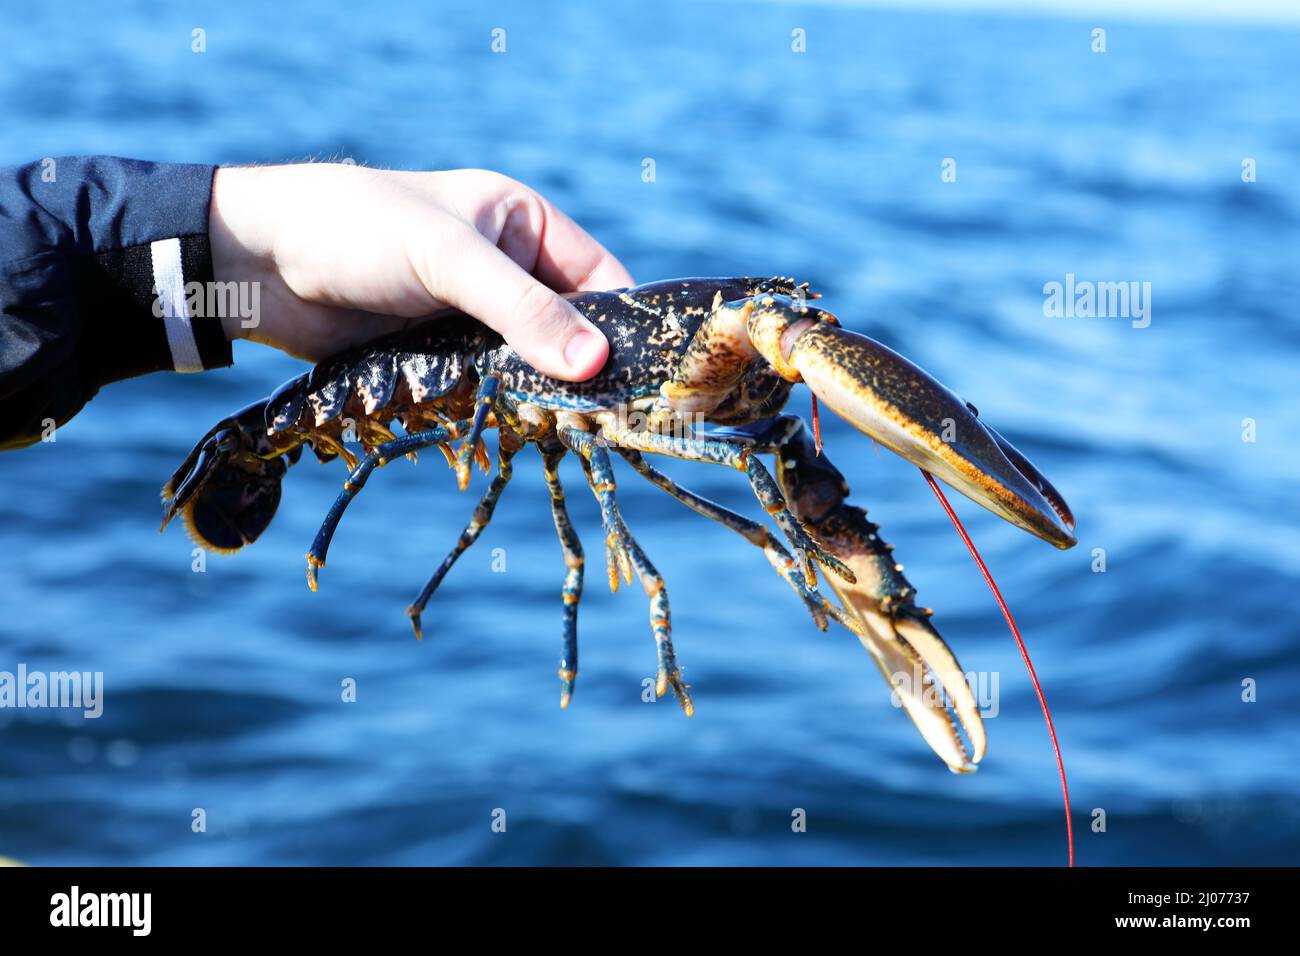 Man holding lobster caught from a lobster creel Stock Photo